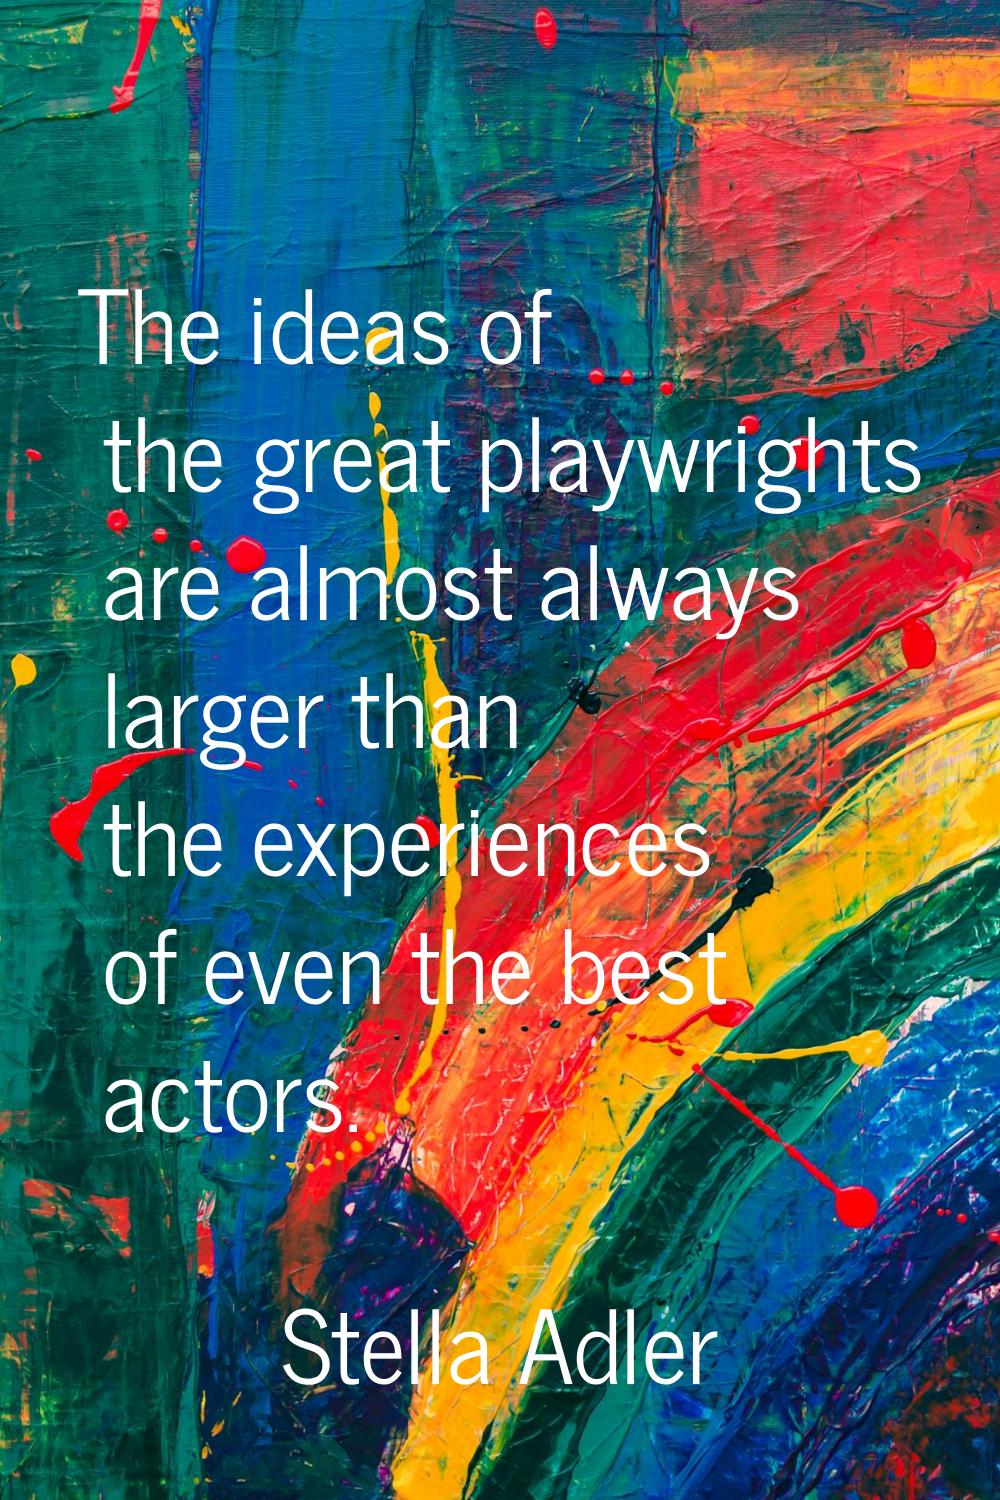 The ideas of the great playwrights are almost always larger than the experiences of even the best a